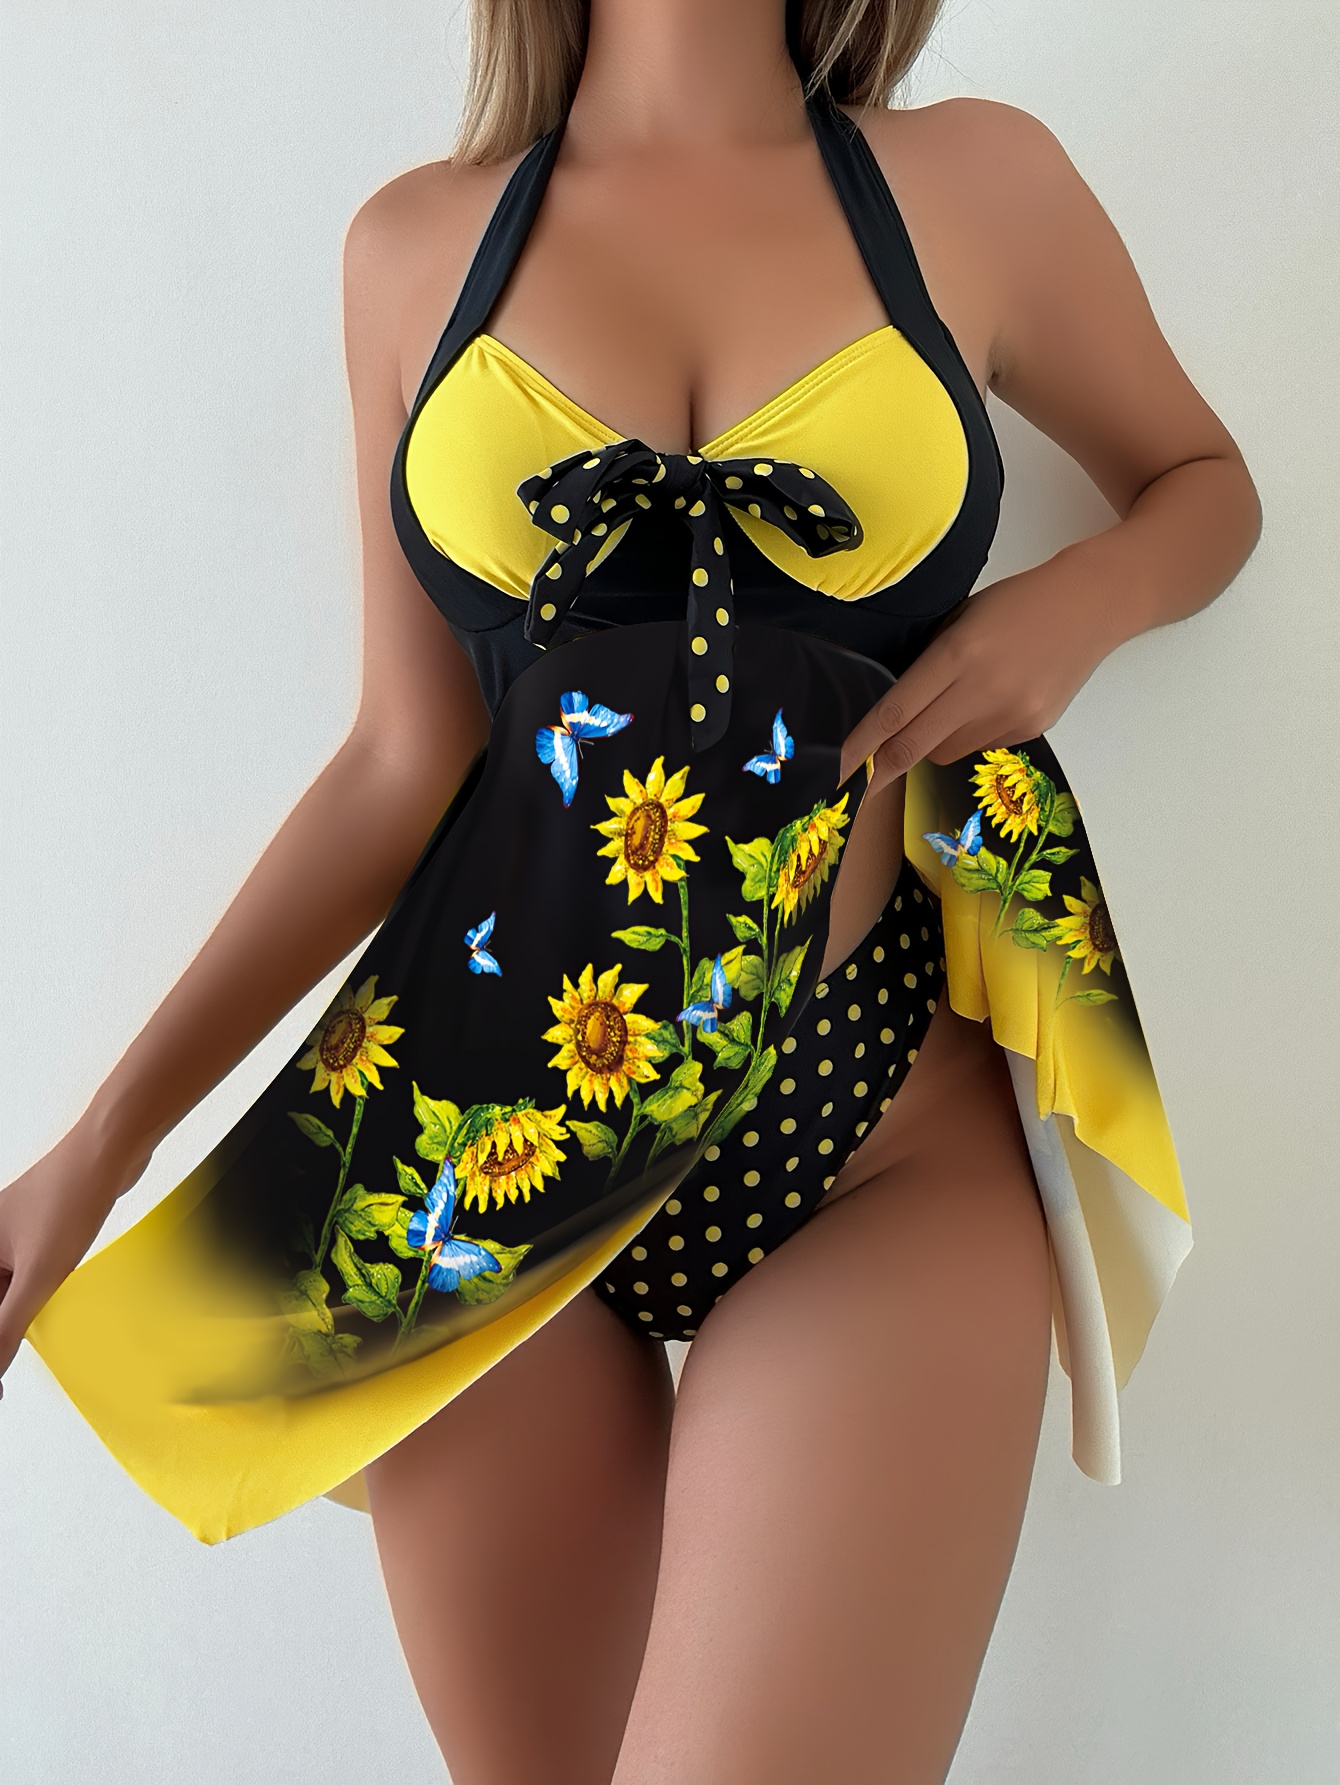 Vintage Halter Ruched Bikini Set With Sunflower Overlay For Large Bust  Swimwear From Hiem, $22.98